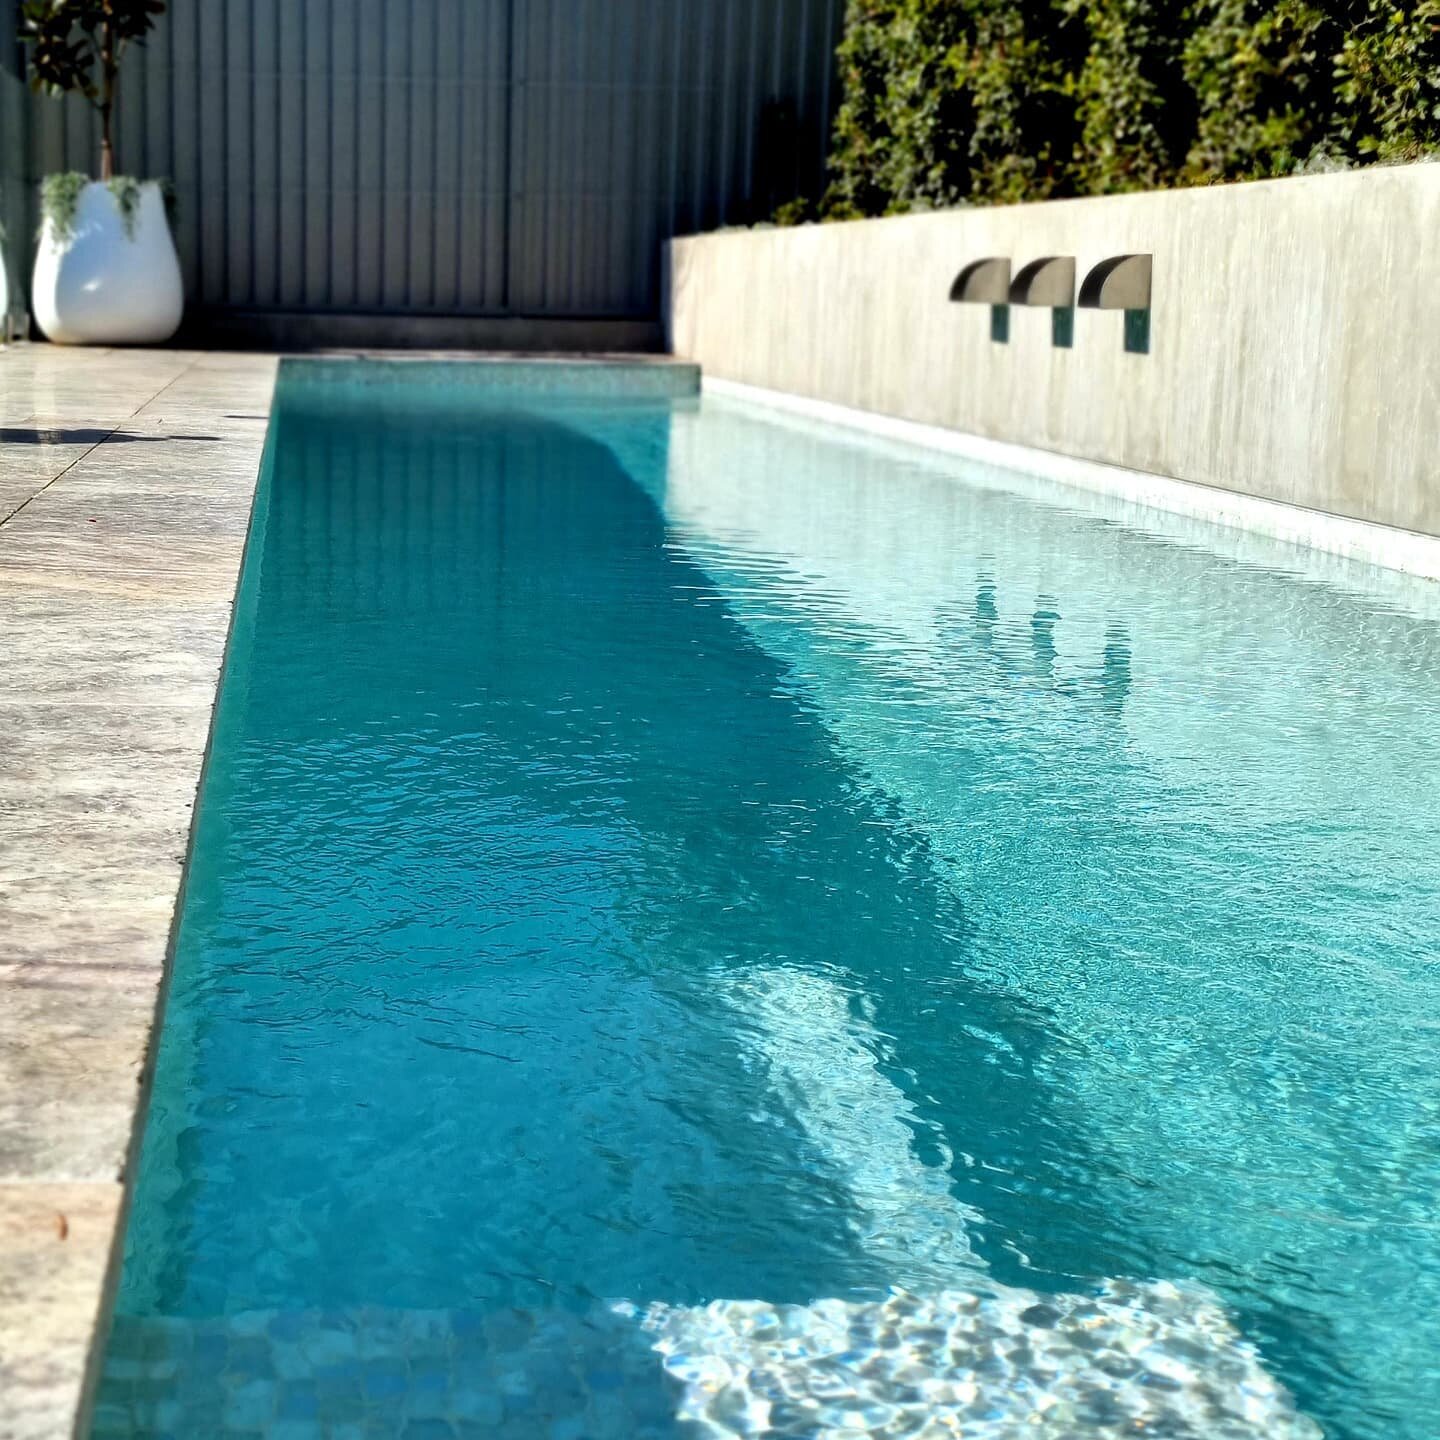 Specialising in timeless styles that age well, growing into the space and complimenting the look and feel of your home. Inspired by thoughtful planting designs and the sounds of water, Poolside create the ideal backdrop to brighten and backdrop your 